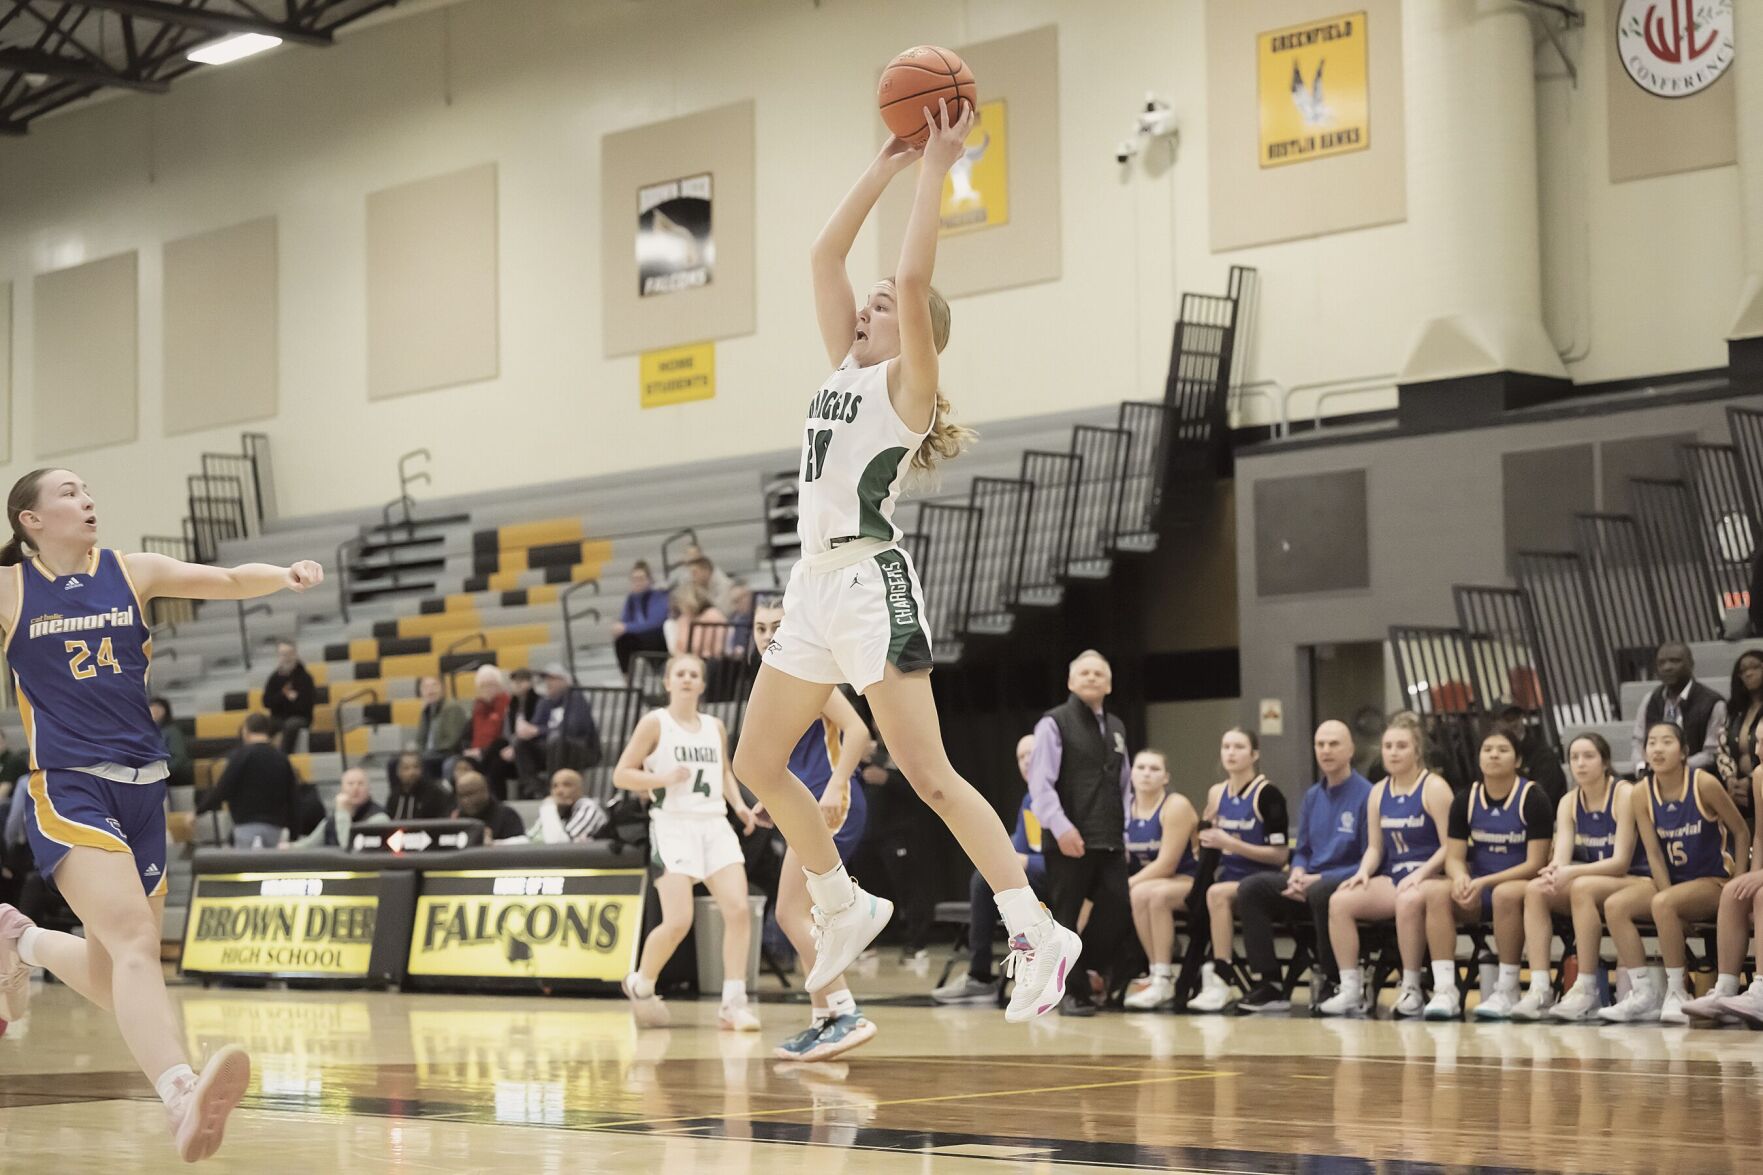 Kettle Moraine Lutheran’s High-Pressure Defense Dominates in Victory Over Waupun